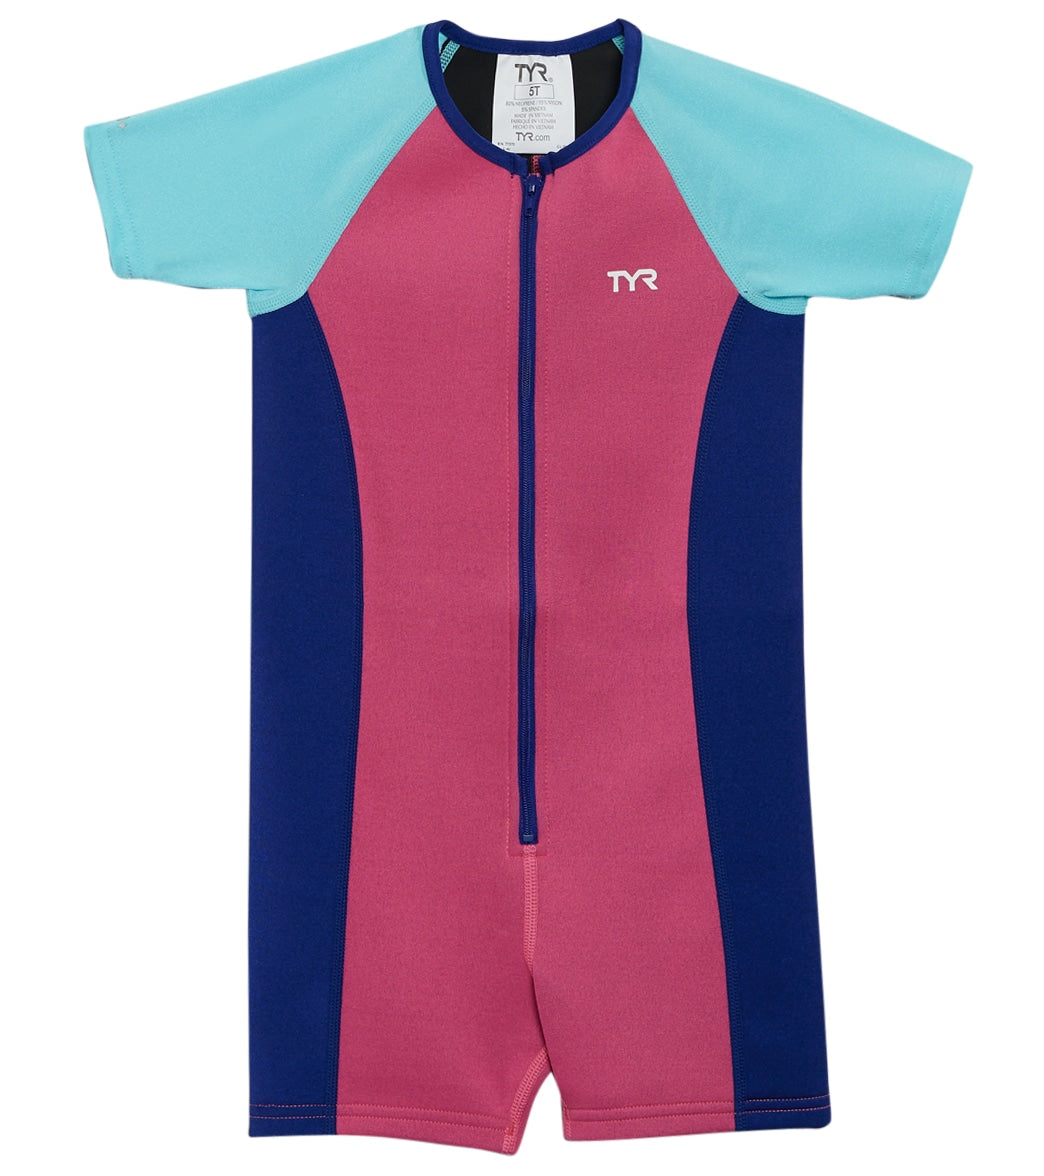 TYR Girls' Upf 50+ Short Sleeve Solid Thermal Suit Toddler/Little/Big Kid - Pink/Mint/Royal 3T - Swimoutlet.com